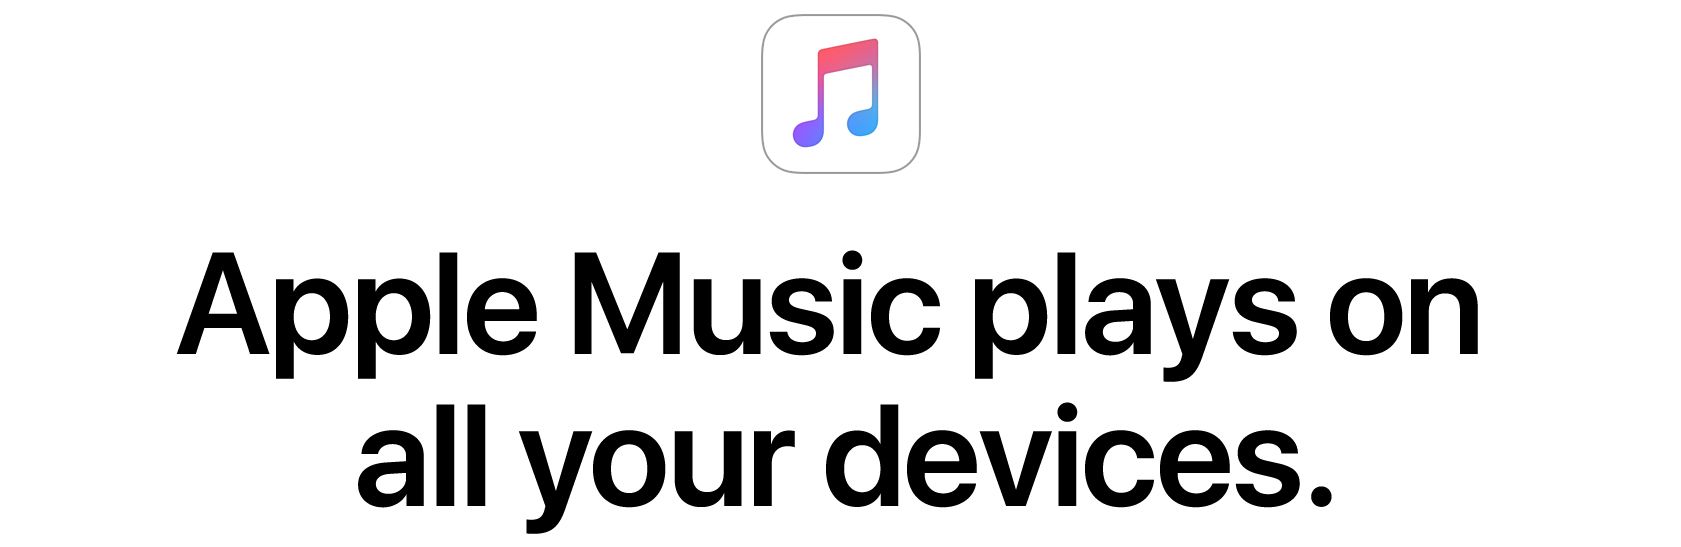 Apple Music plays on all of your devices